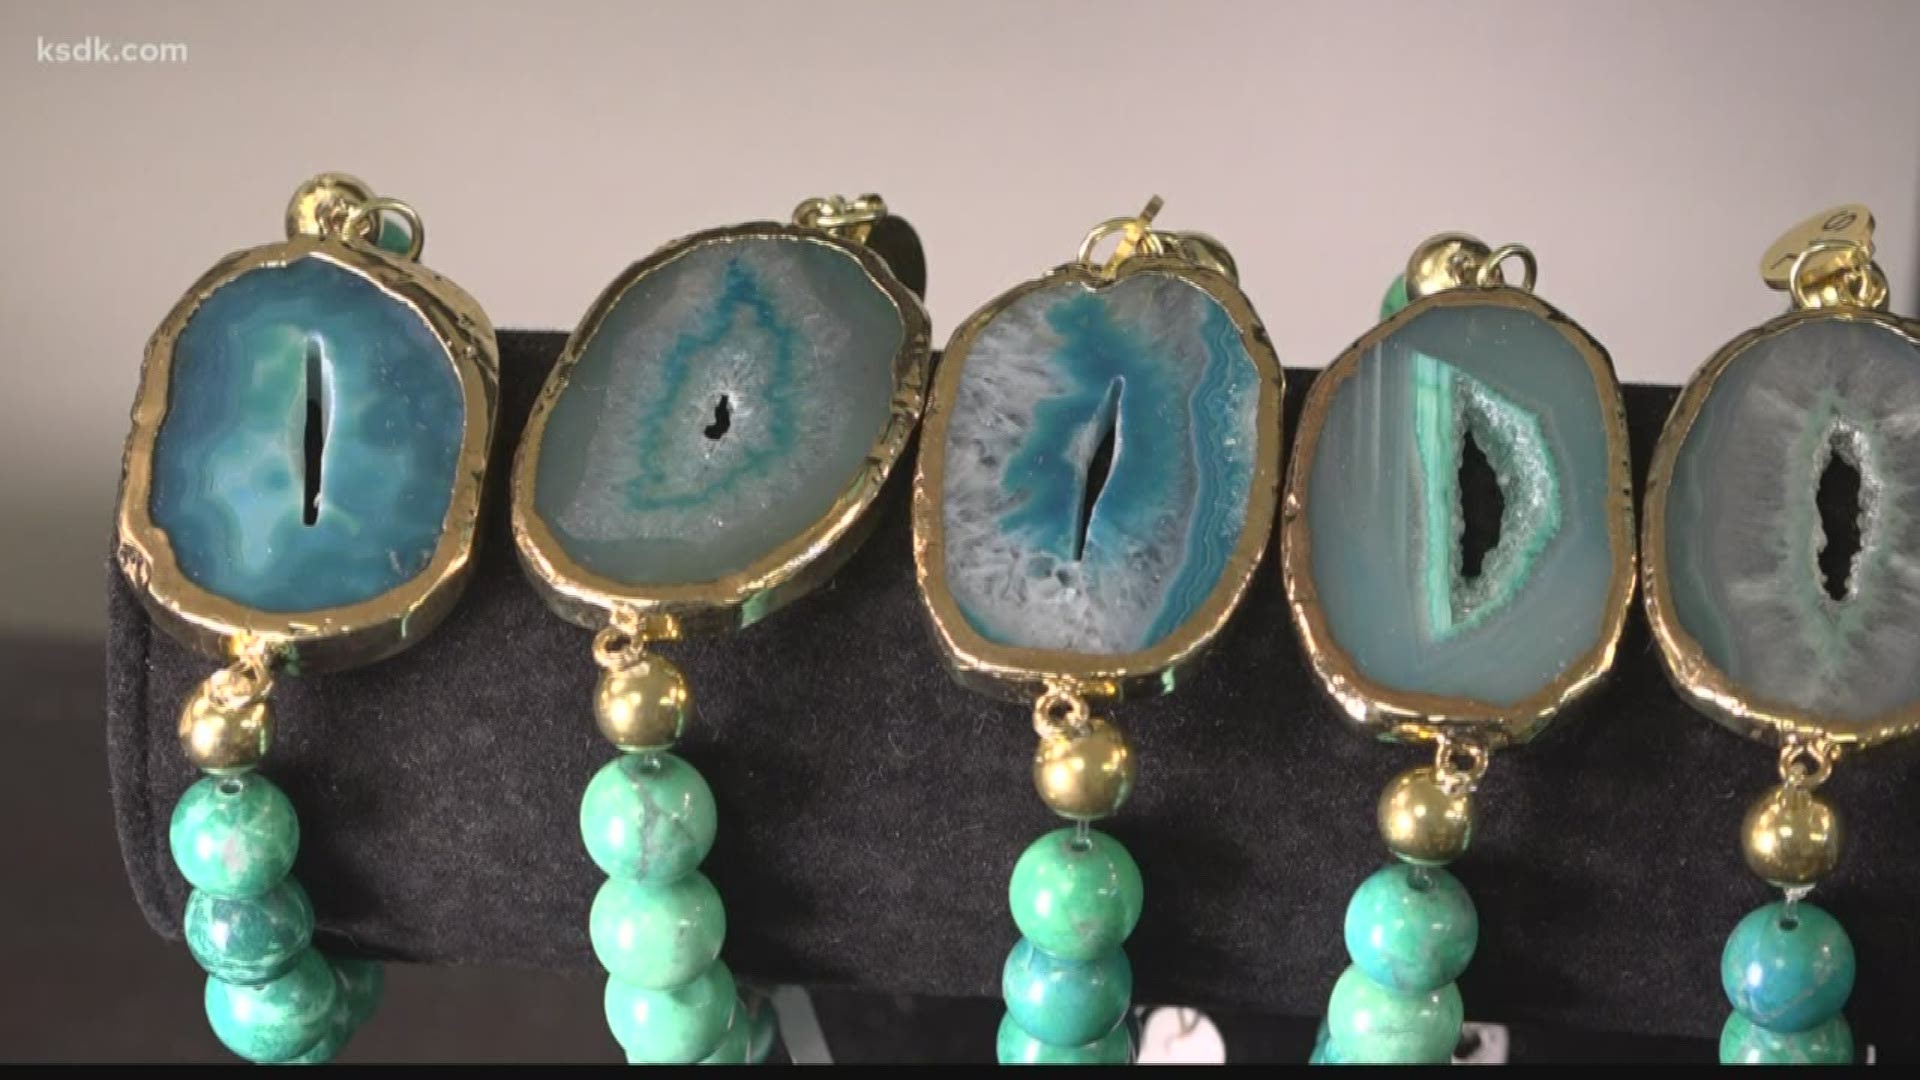 Inspired by her grandmother who loved making jewelry, an Ellisville woman started ‘Sunny + Luna’ from her basement.